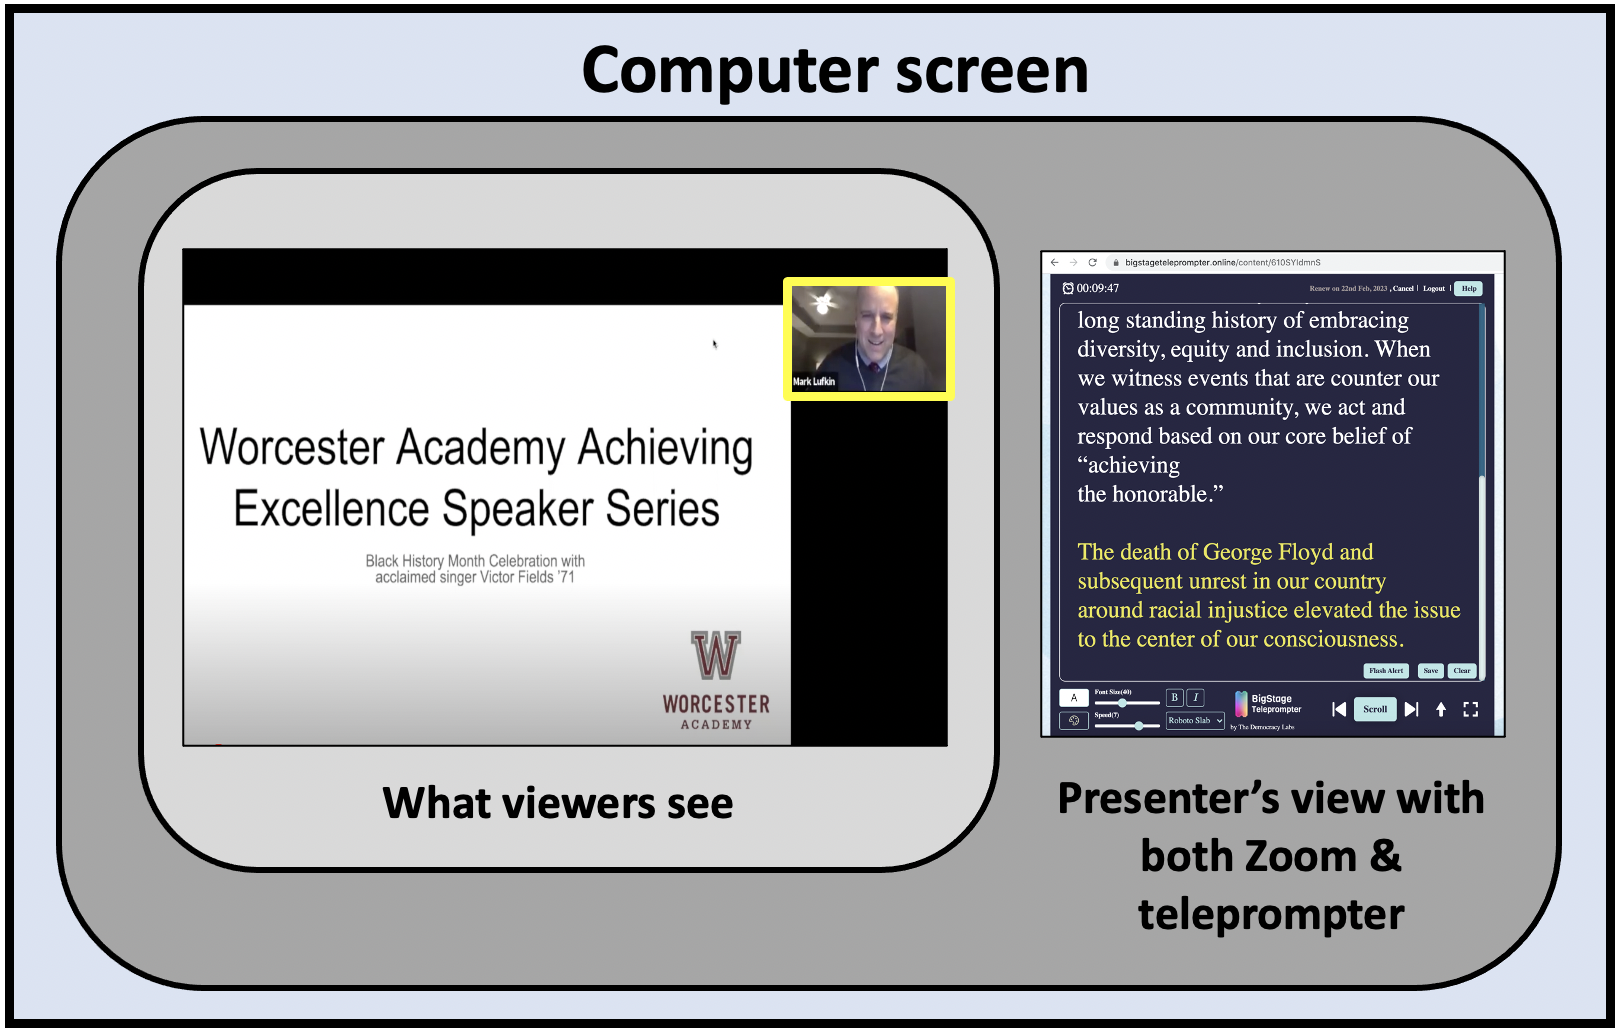 The BigStage Teleprompter runs in its own browser window which can be placed next to the Zoom window.